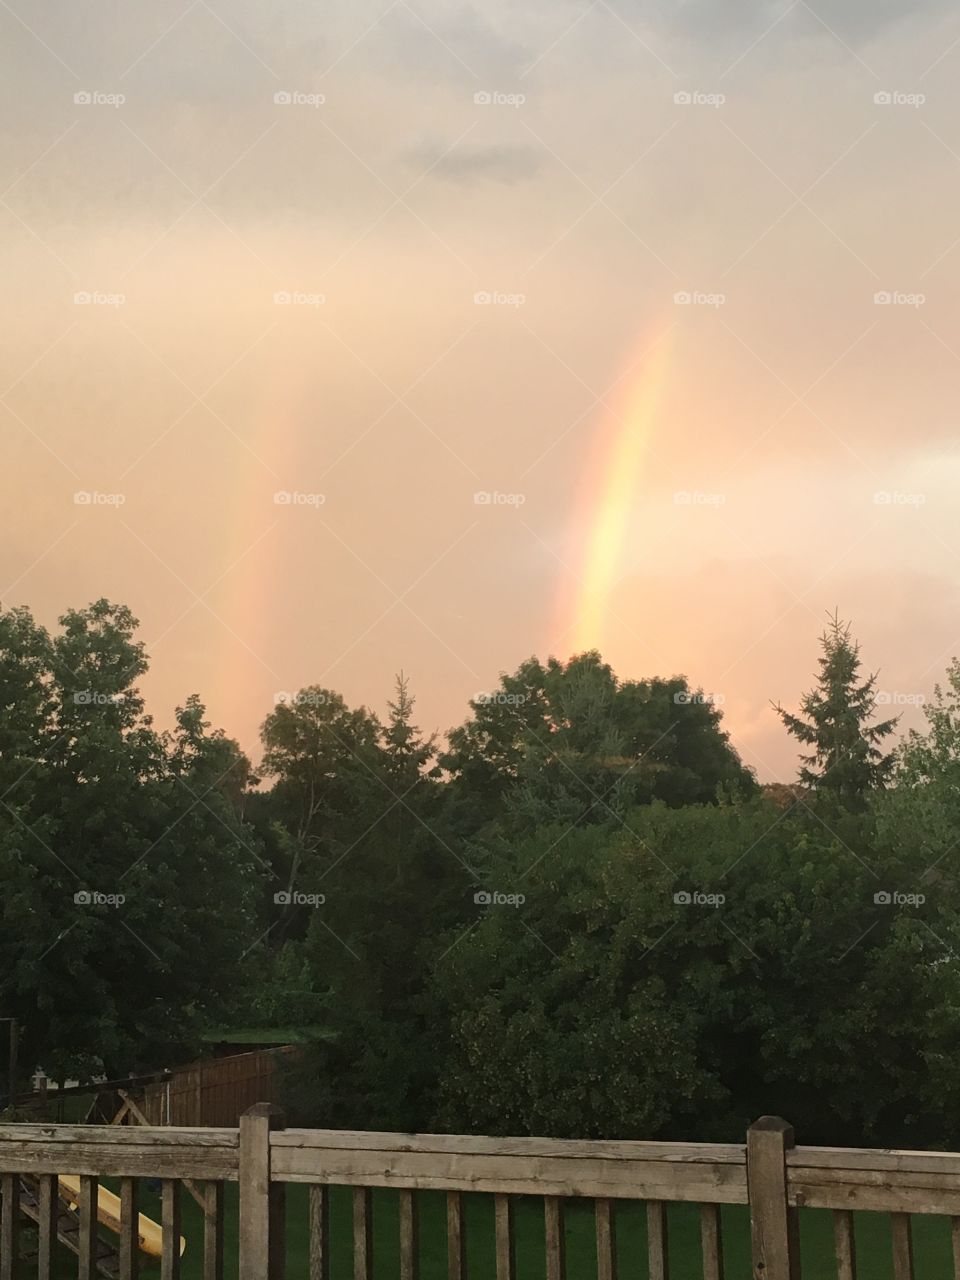 Sunset and a double rainbow after a summer storm!